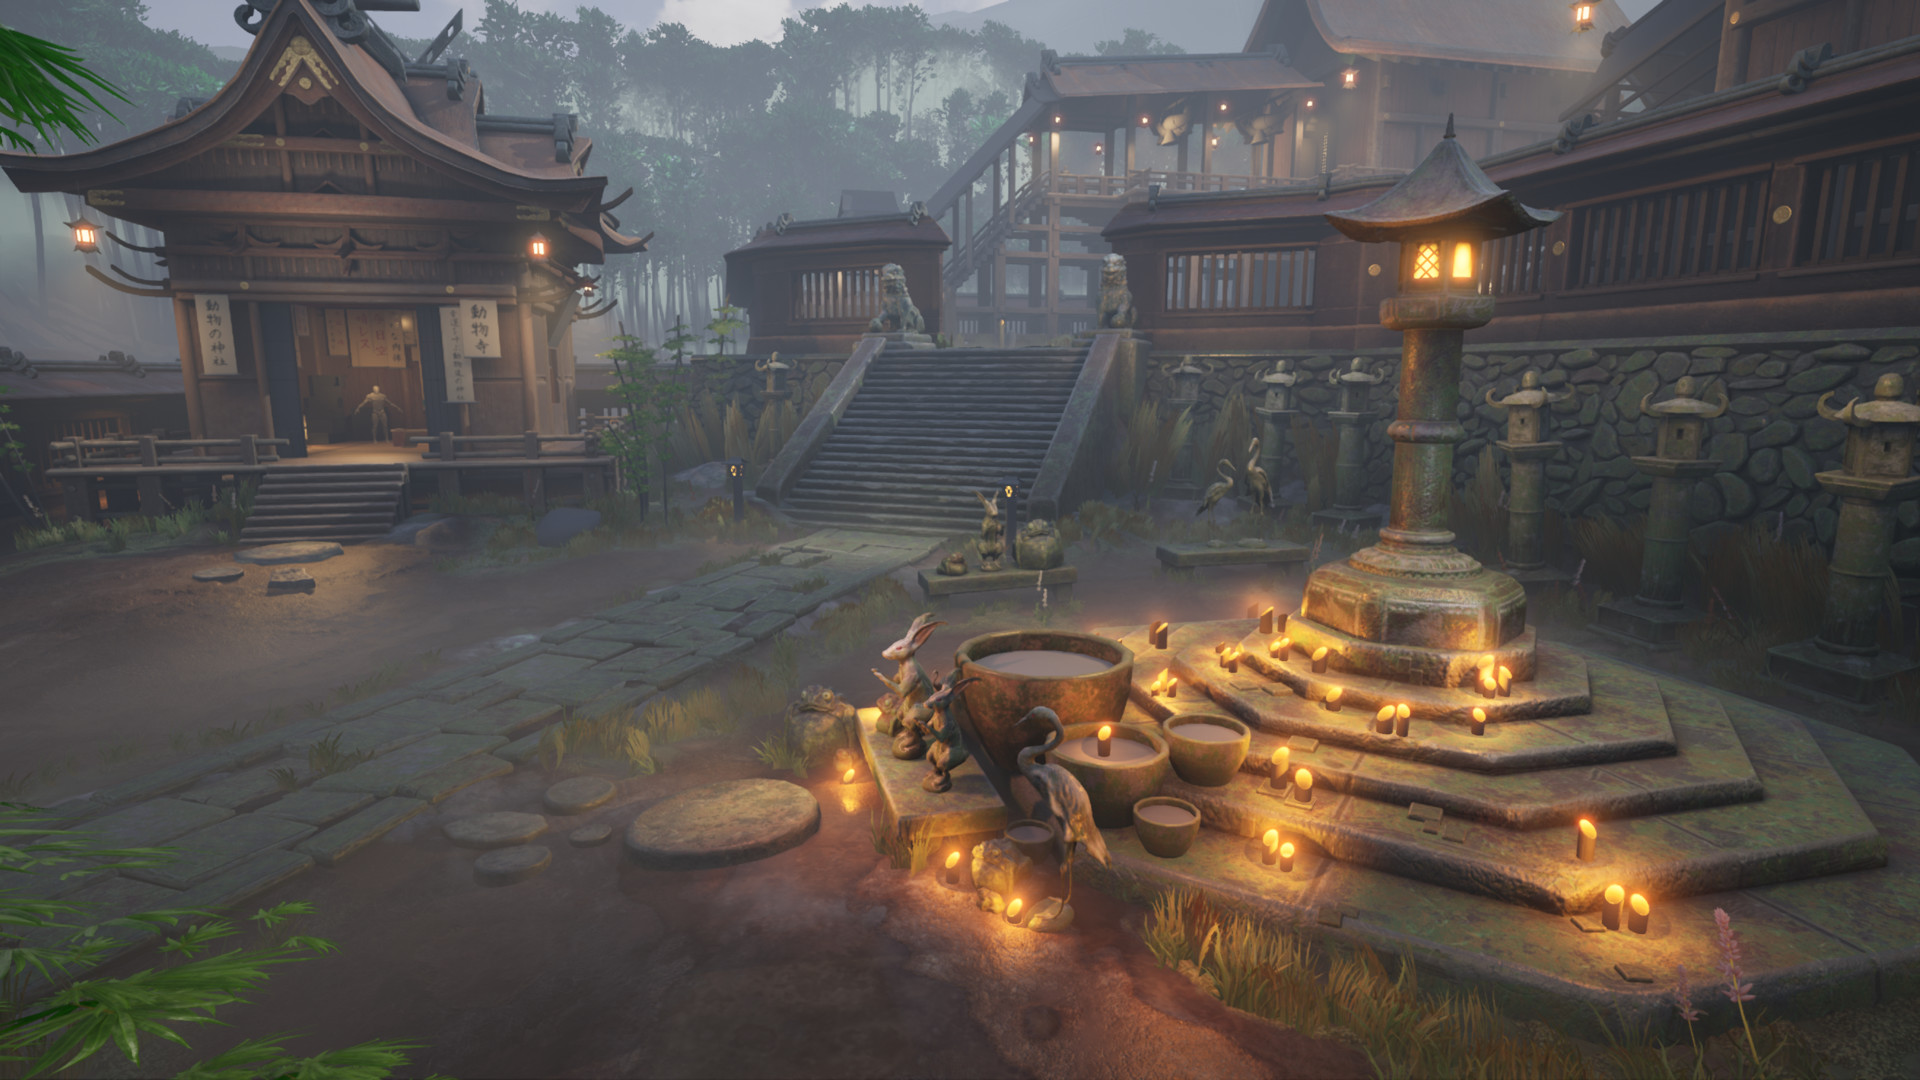 Main camera angle screenshot from Unreal 4. The steps leading to the stone lantern on the shrine on the left are now proper static meshes with textures. The little lanterns are replaced for bamboo cuts with a flame inside them (like candles).